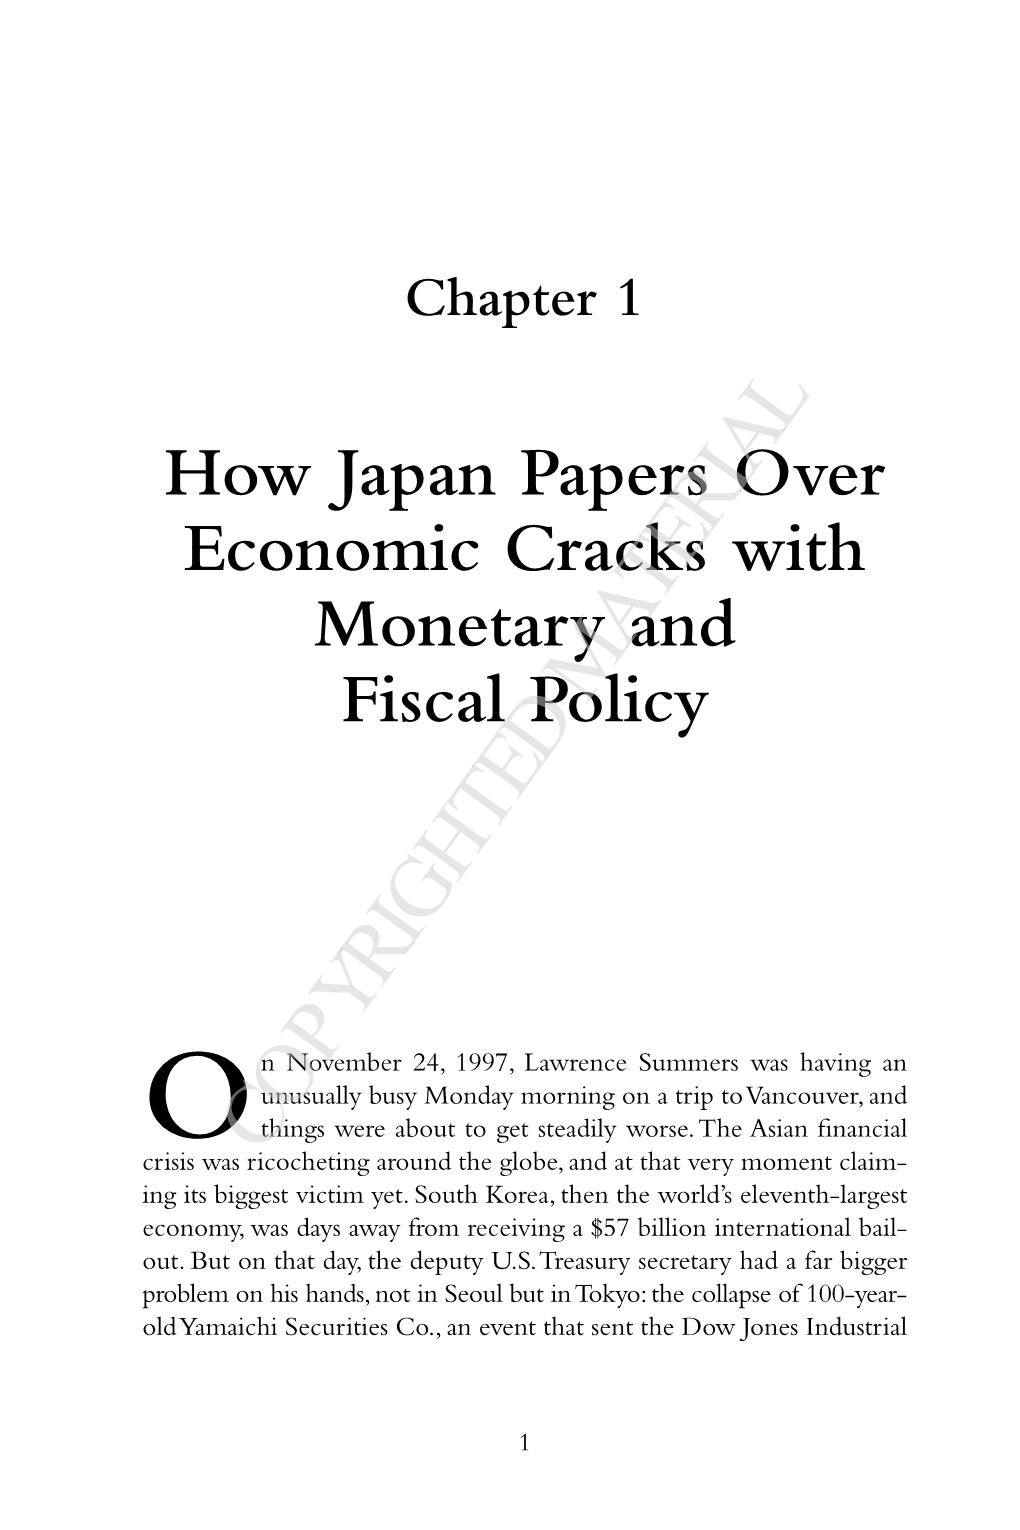 How Japan Papers Over Economic Cracks with Monetary and Fiscal Policy